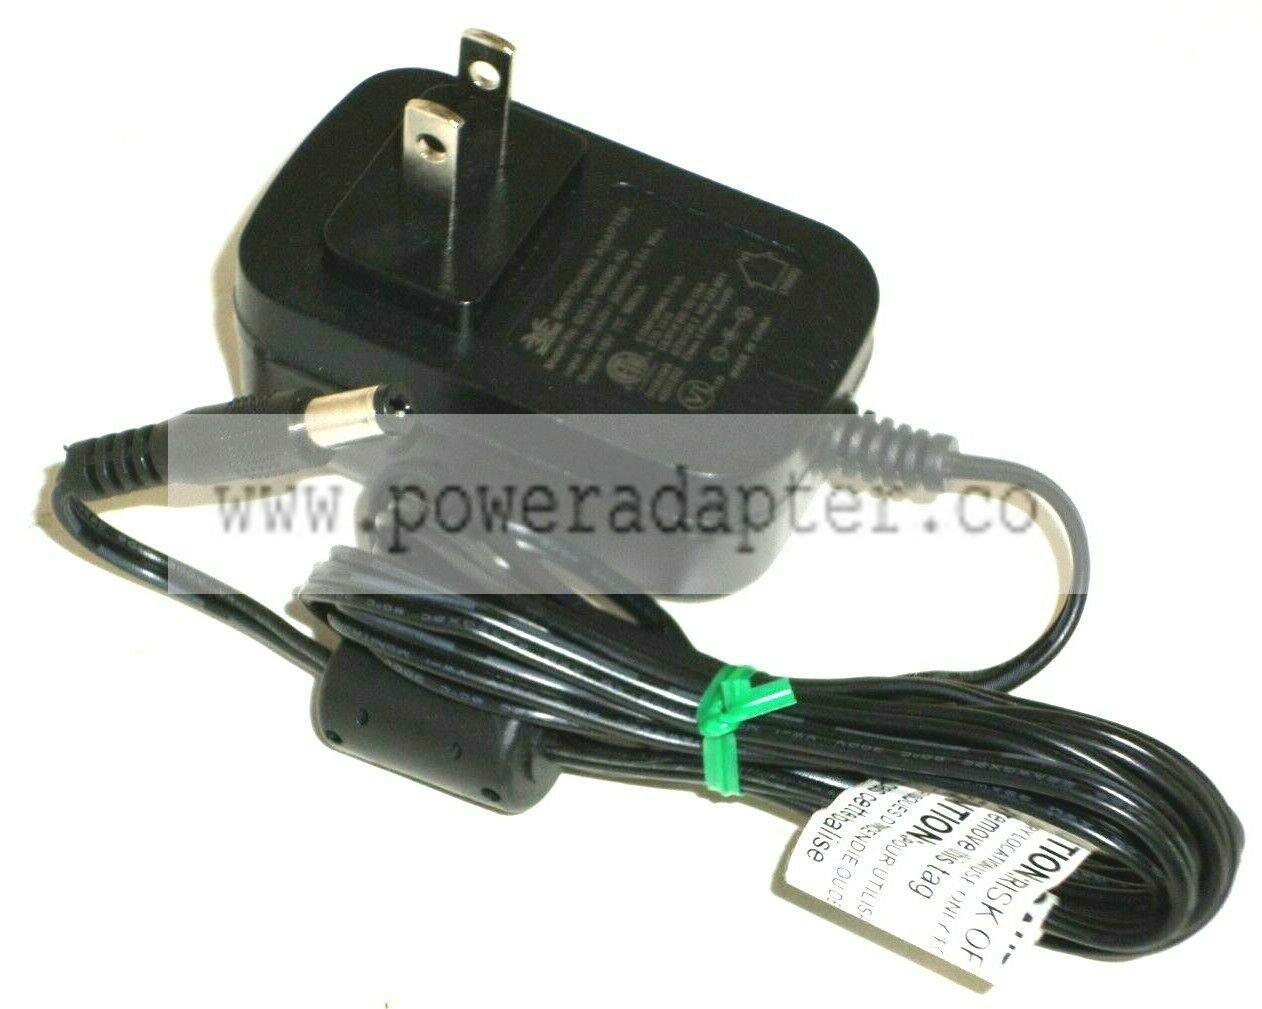 3YE Switching Power Supply AC Adapter 19V 500mA P/N GQ12-190060-AU Type: AC/AC Adapter Output Voltage: 19 V MPN: GQ1 - Click Image to Close